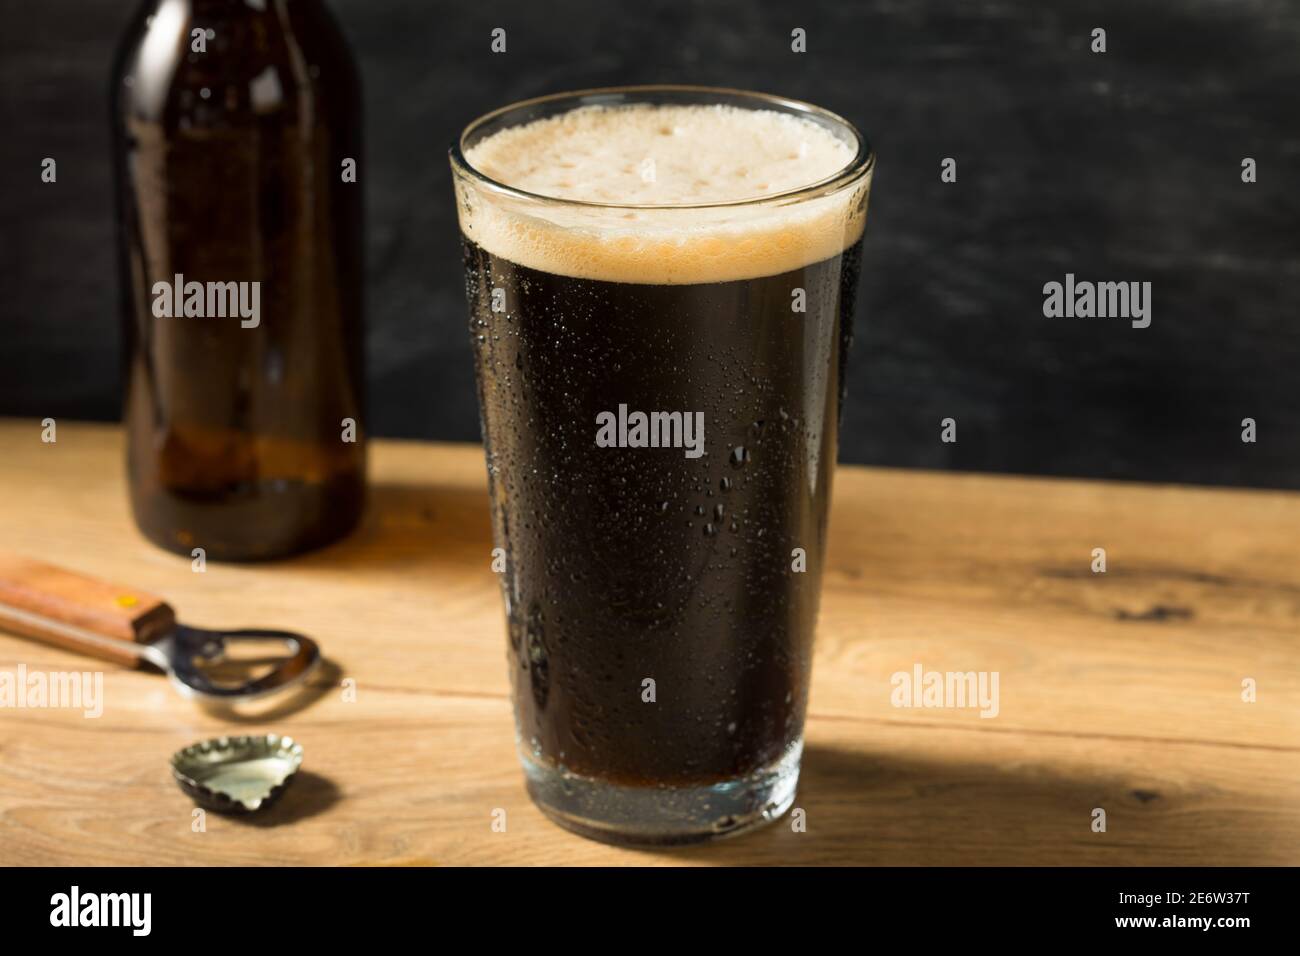 Refreshing Boozy Dark Stout Beer in a Pint Glass Stock Photo